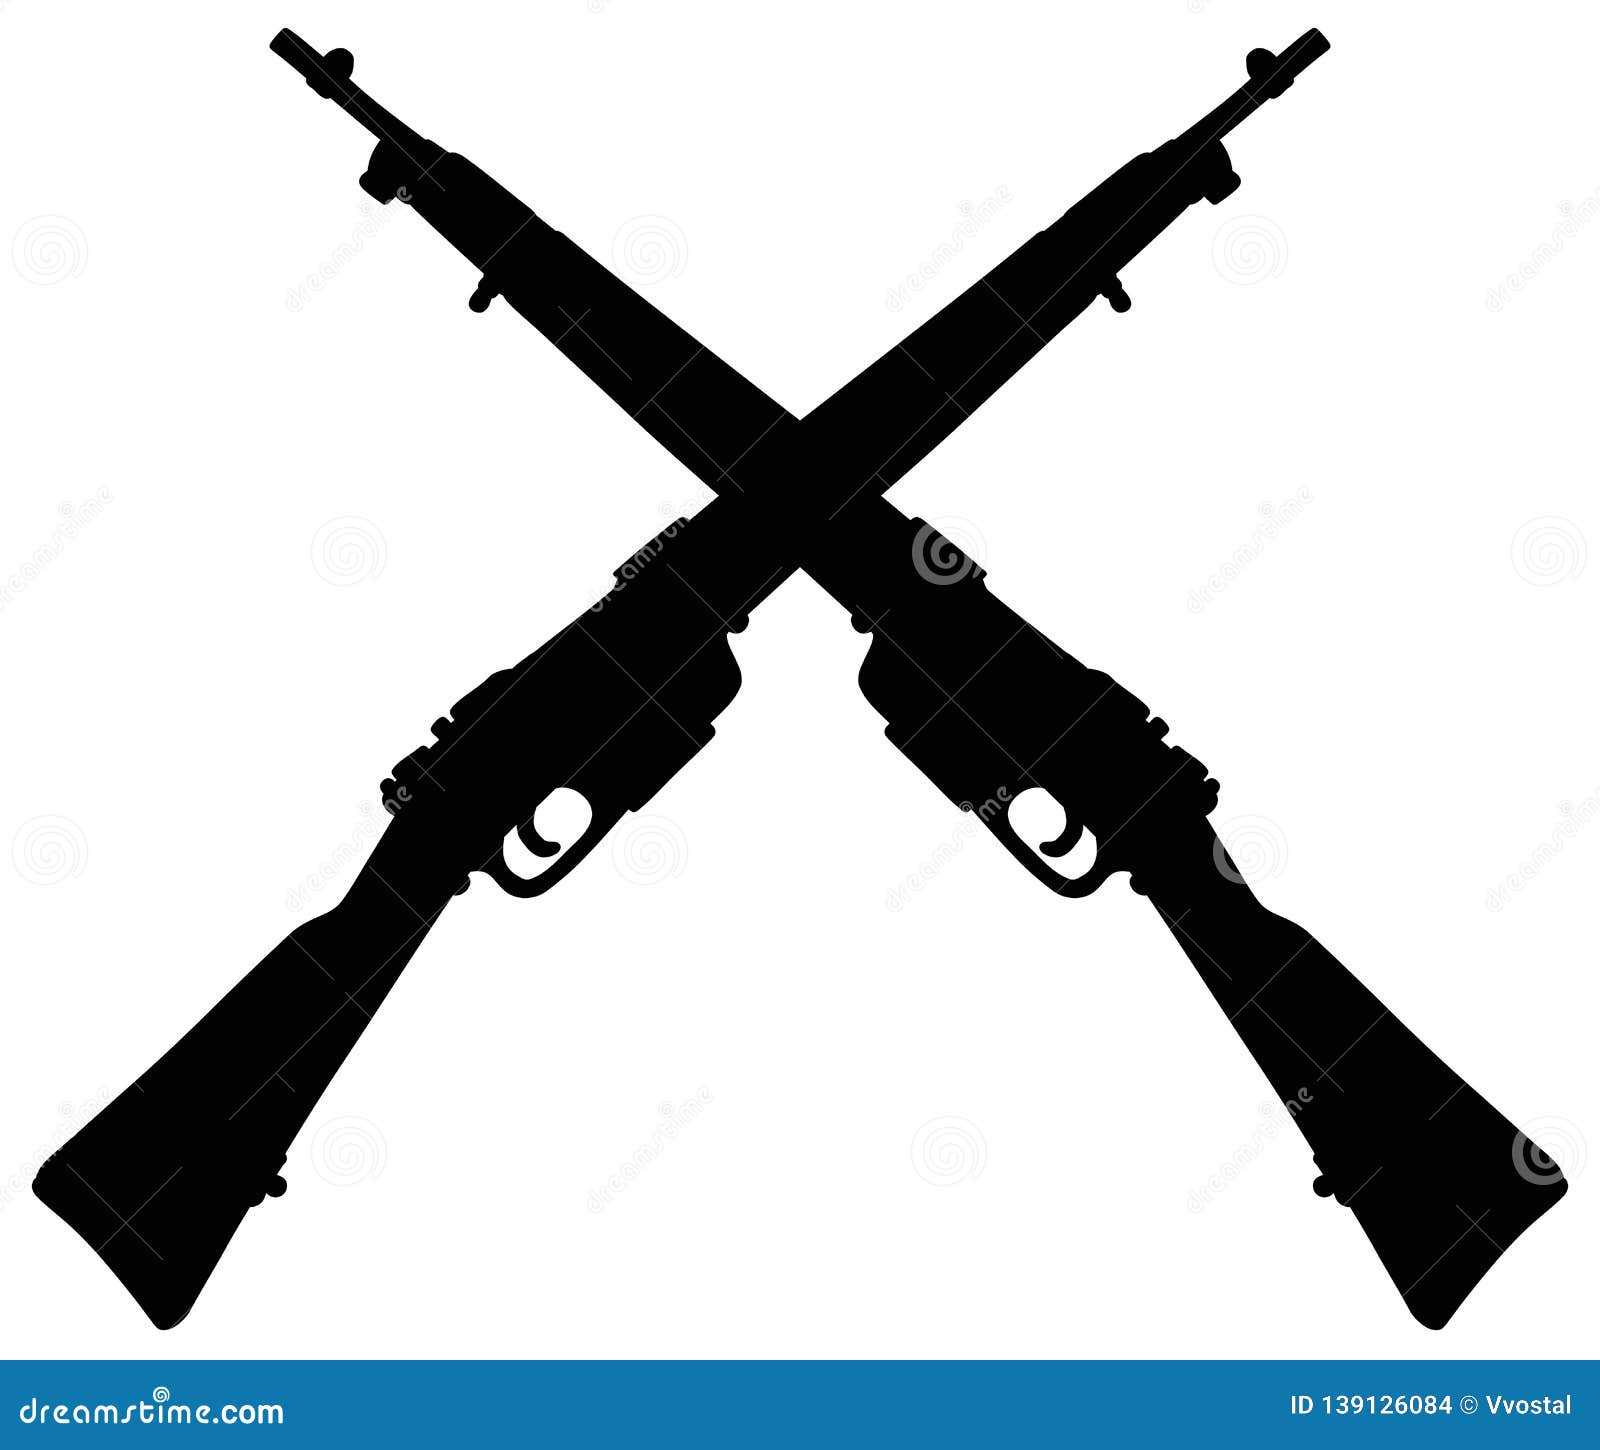 Two Silhouettes Of Old Military Rifles Vector Illustration ...